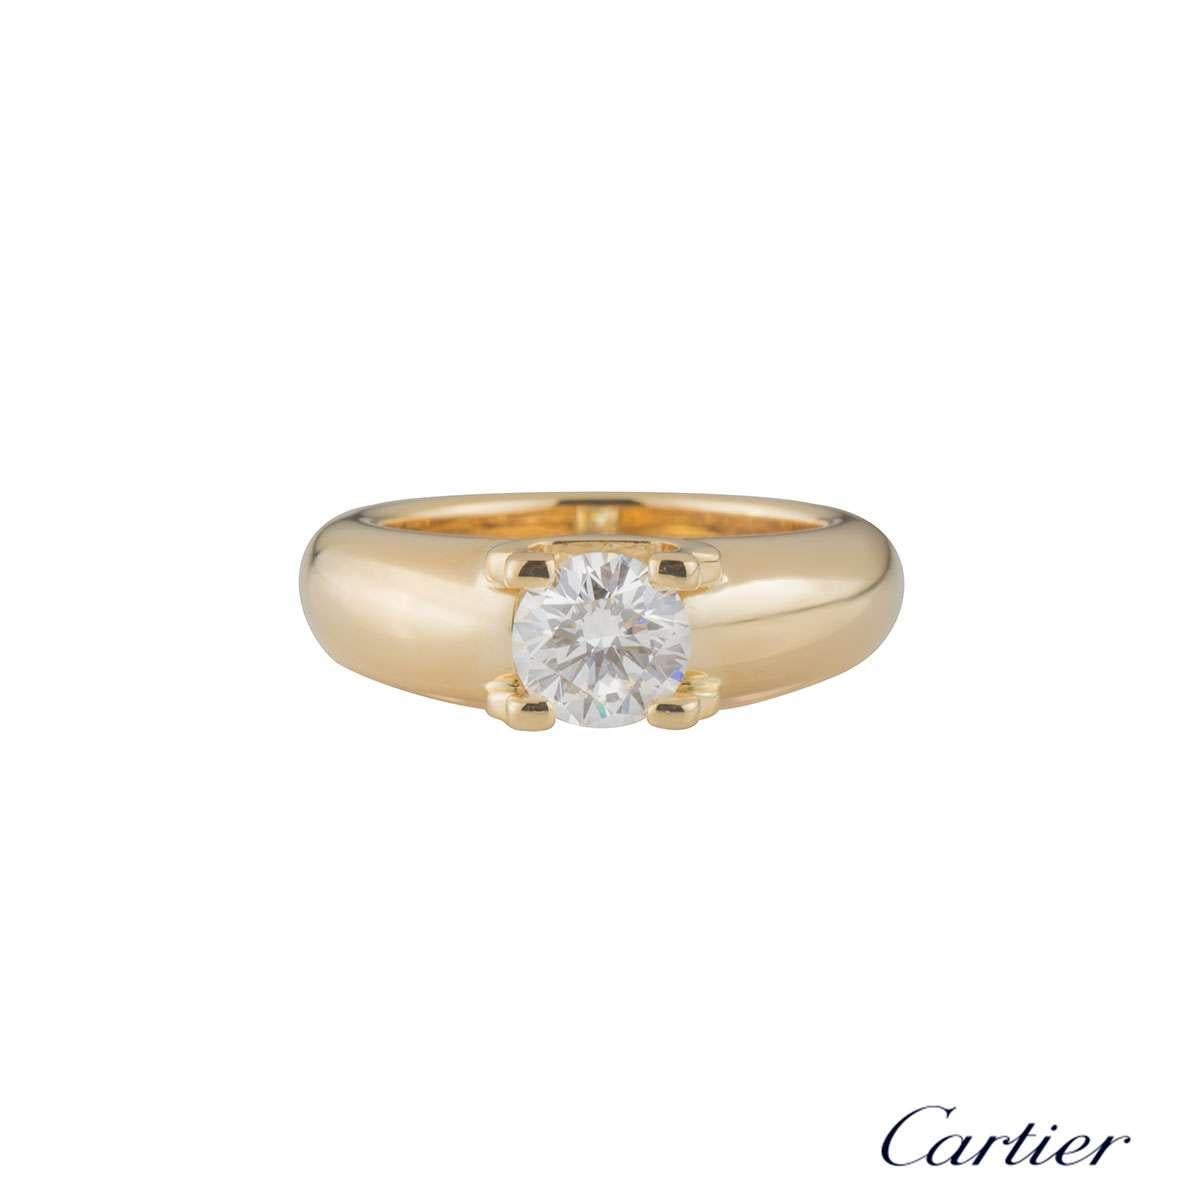 An 18k yellow gold diamond ring from the Cartier C de Cartier collection. The ring is set to the centre with a round brilliant cut diamond  in a C de cartier motif 1.01ct , G colour and VVS2 in clarity. The tapered ring measures 4mm in width and is